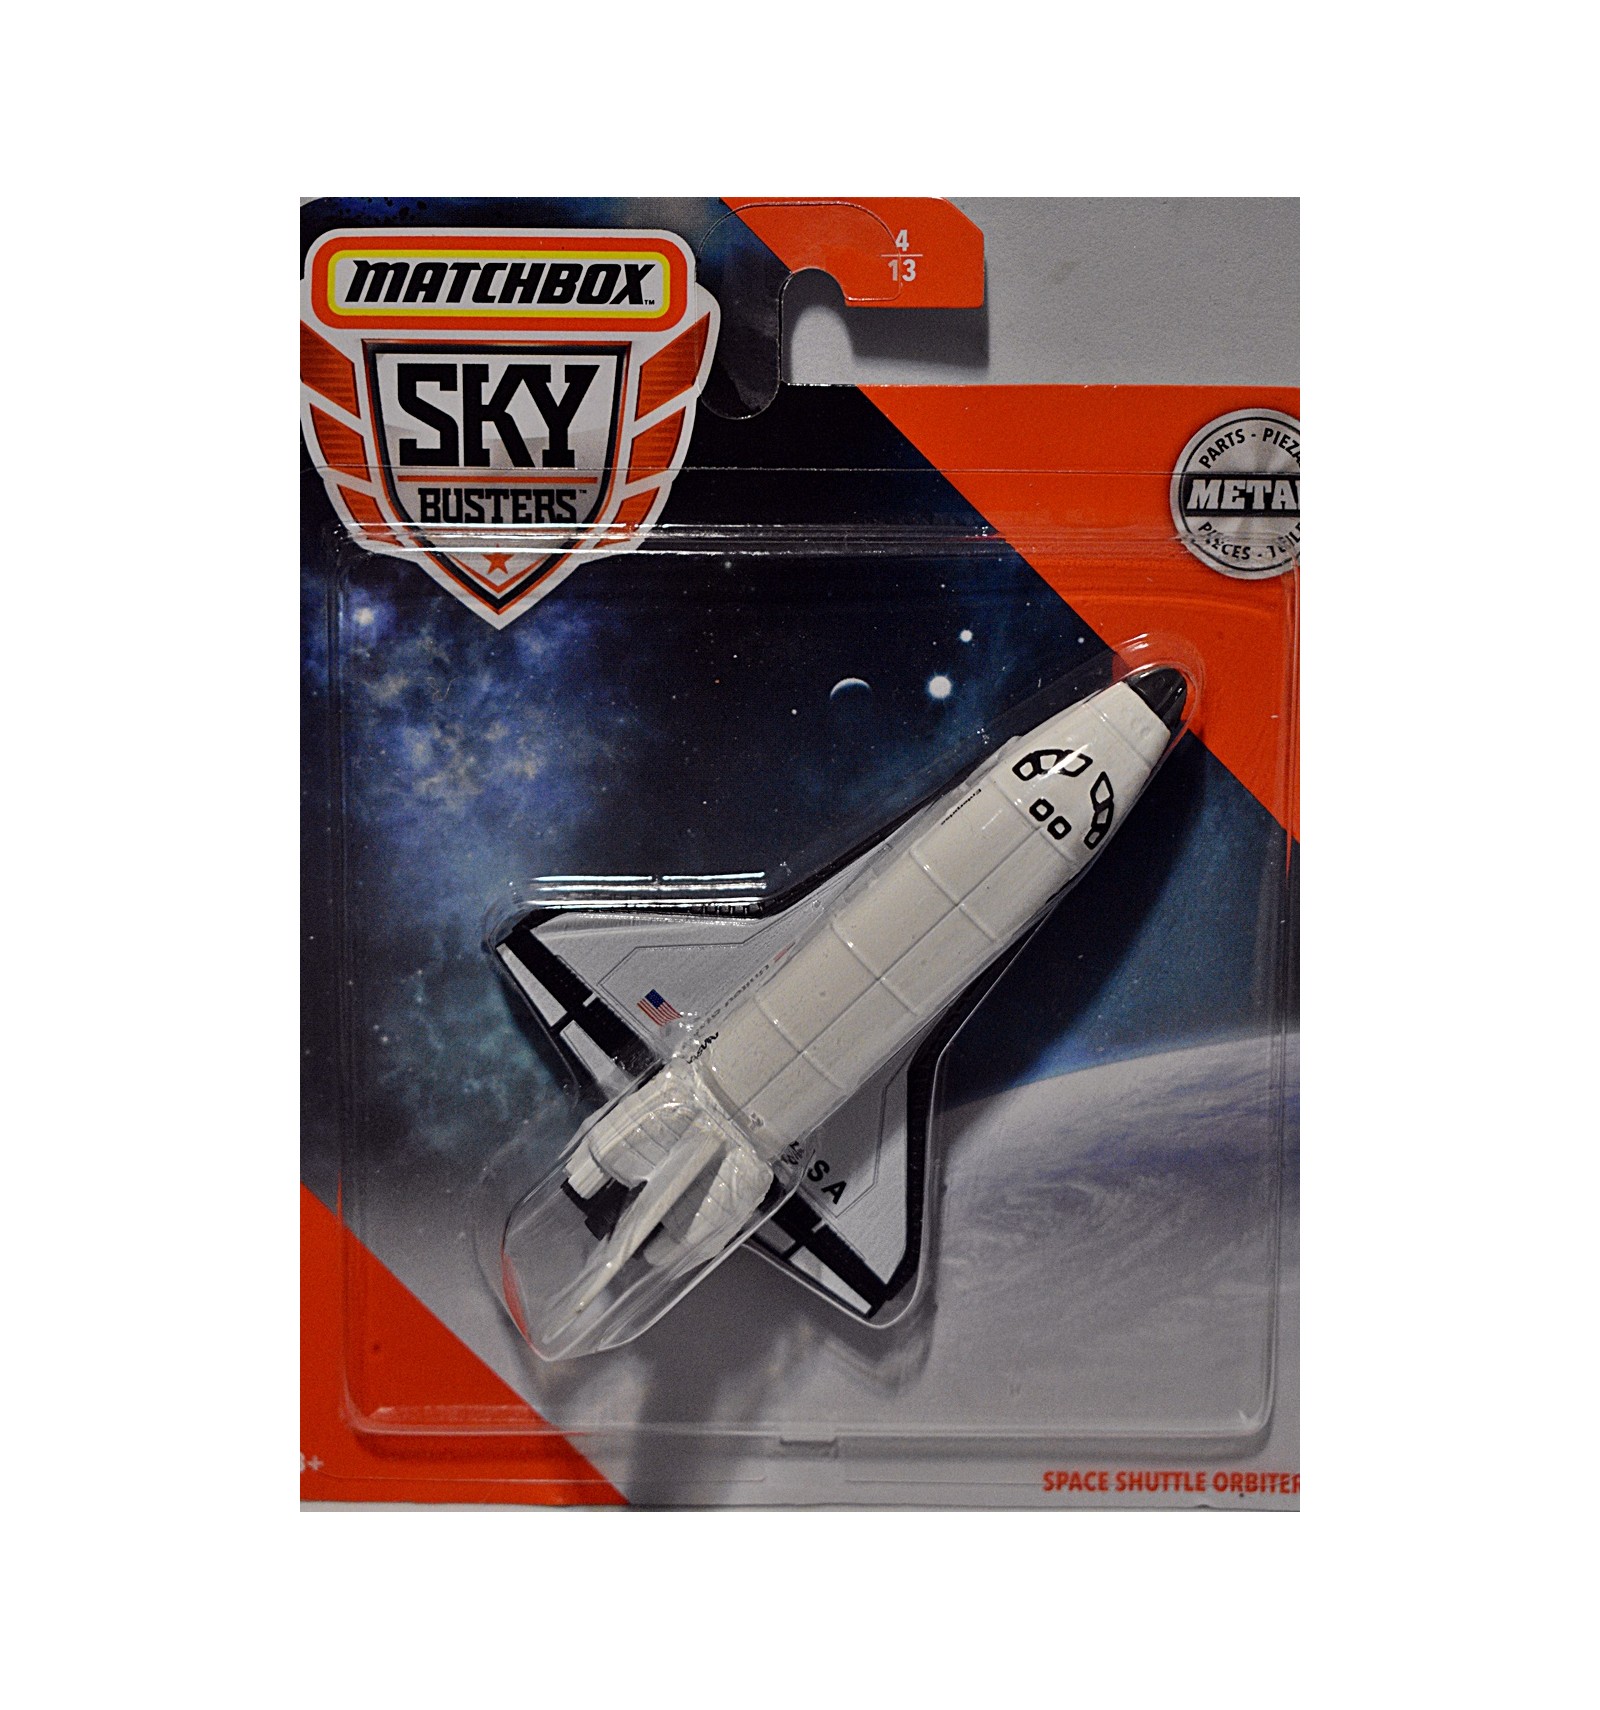 Matchbox Sky Busters Space Shuttle Orbiter Ggt53 2019 for sale online 